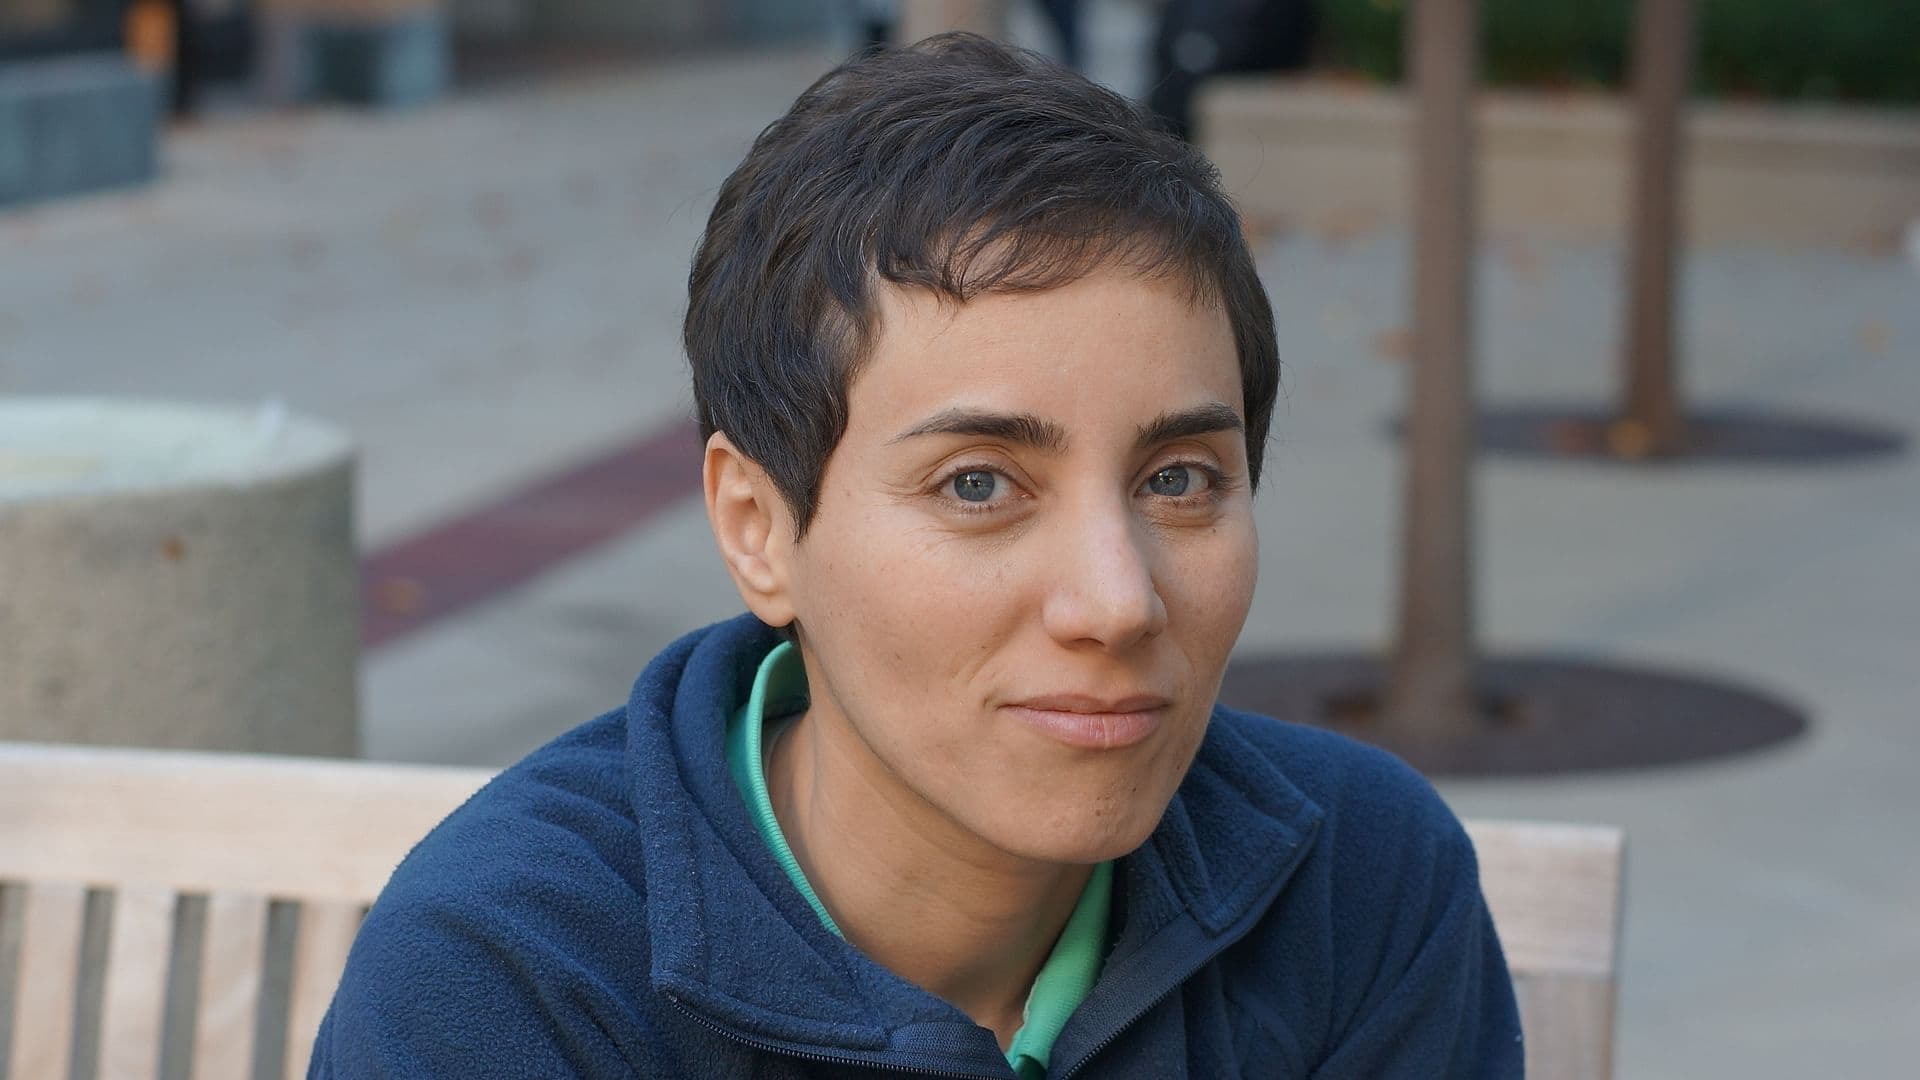 Secrets of the Surface: The Mathematical Vision of Maryam Mirzakhani (2020)